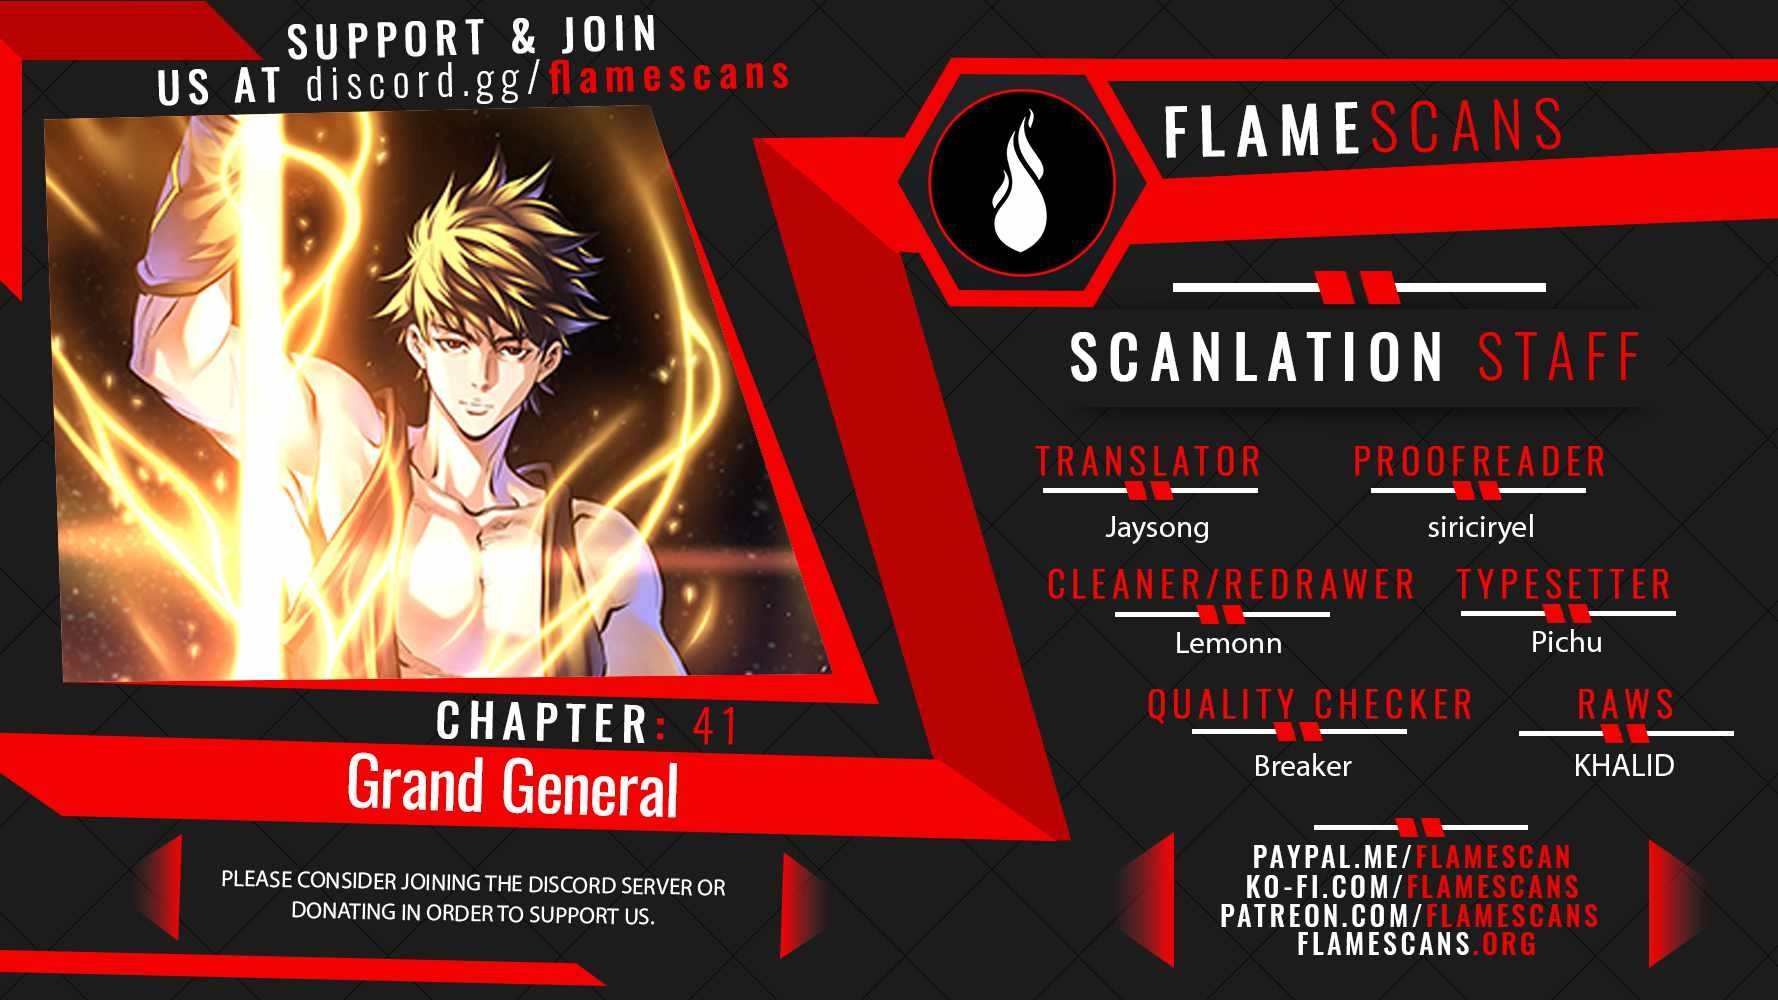 Grand General Chapter 41